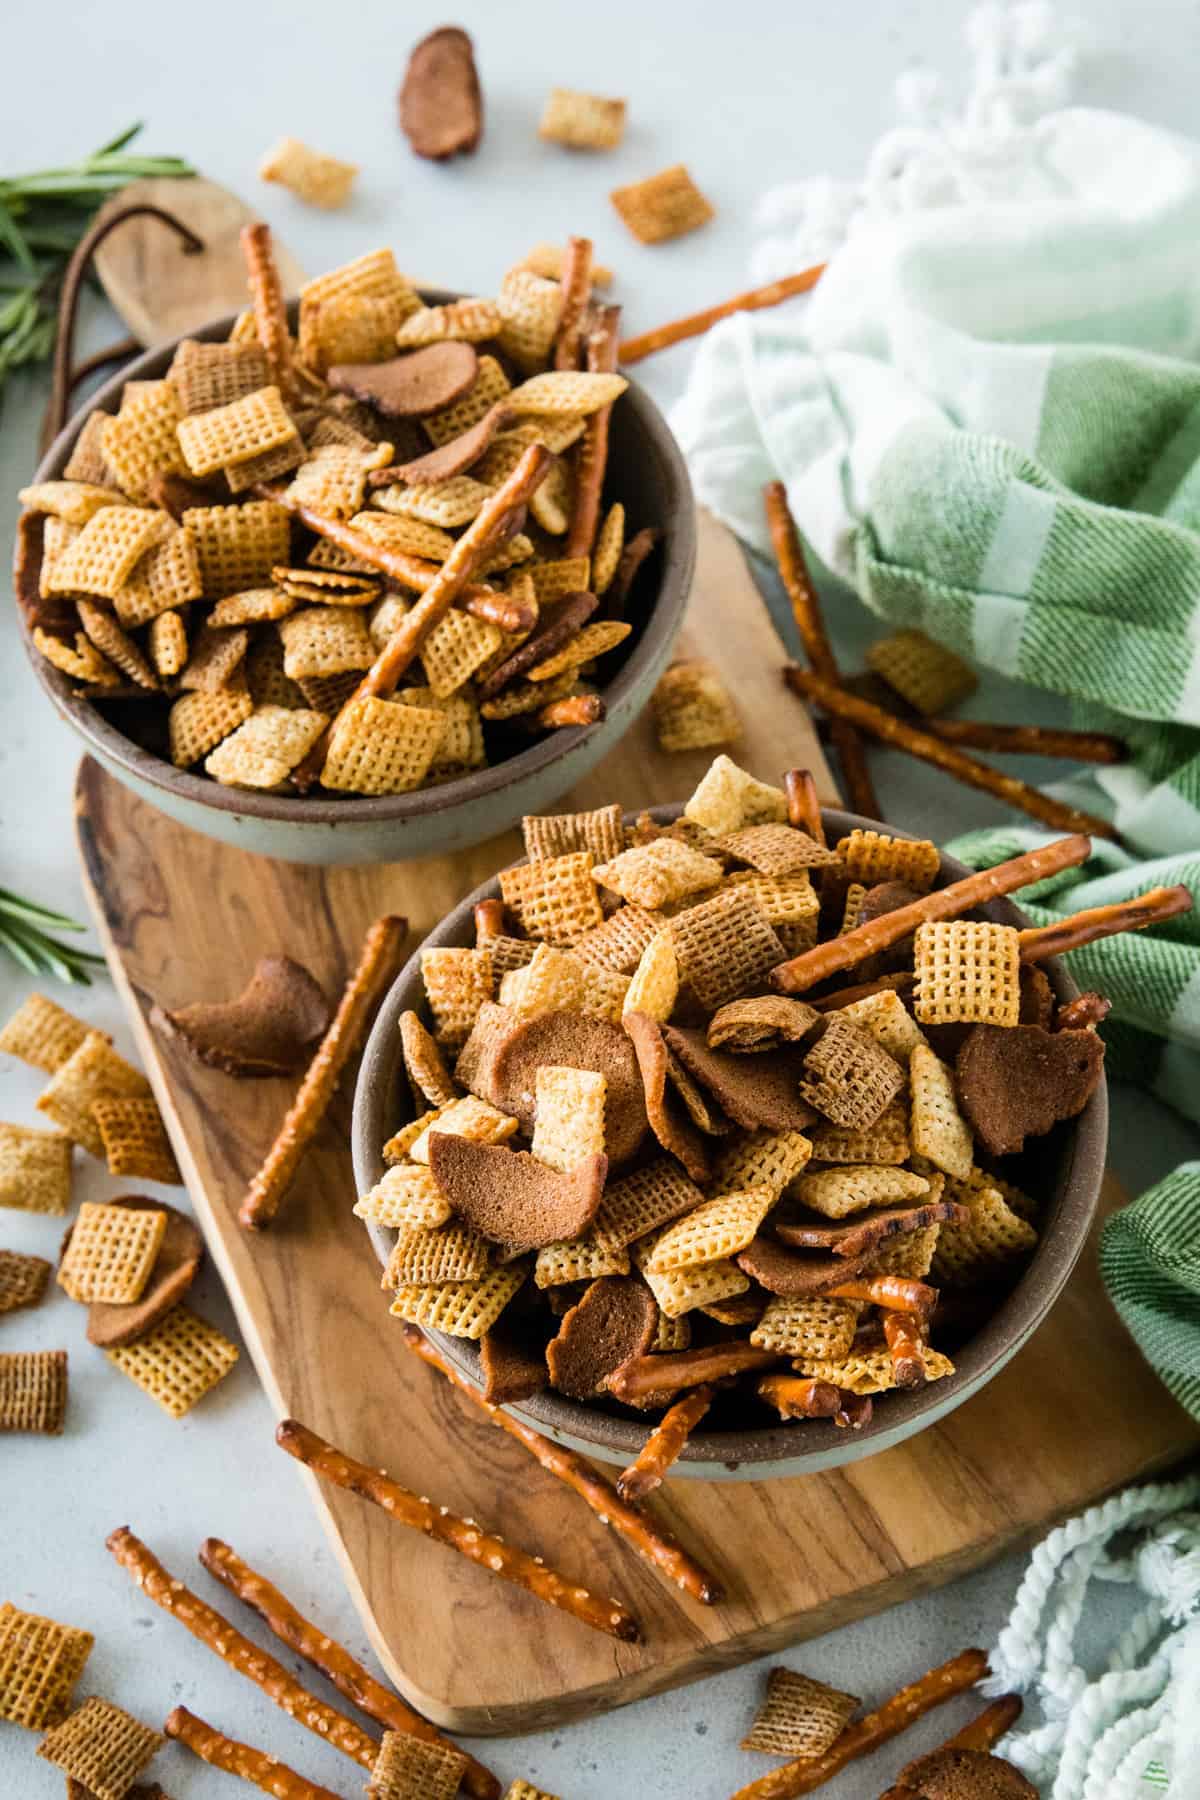 Bowls of chex mix on wood cutting board